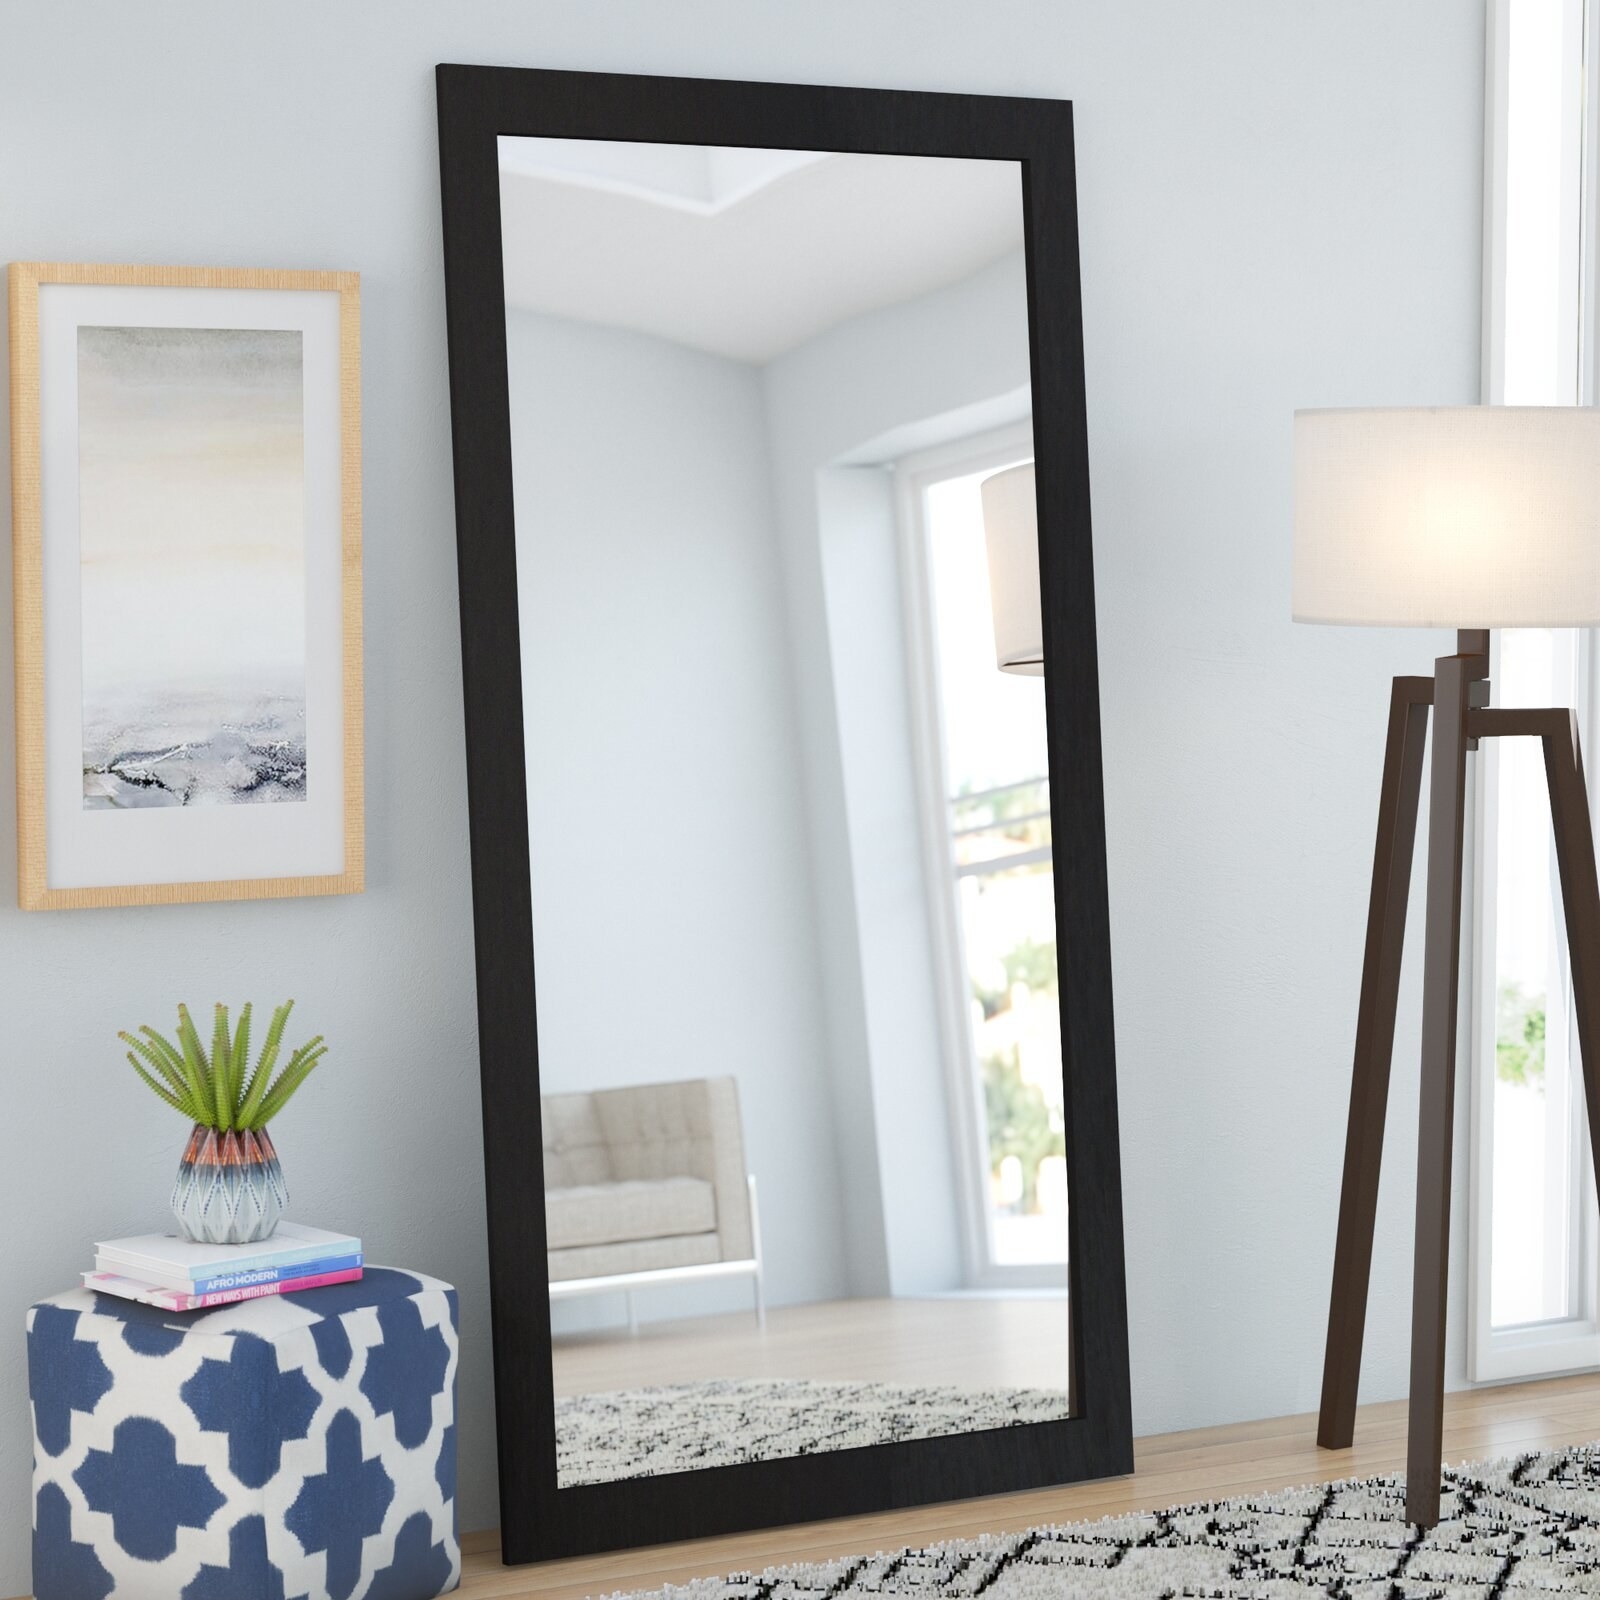 A modern, wooden full-length mirror that can lean against walls in bedrooms or guest rooms